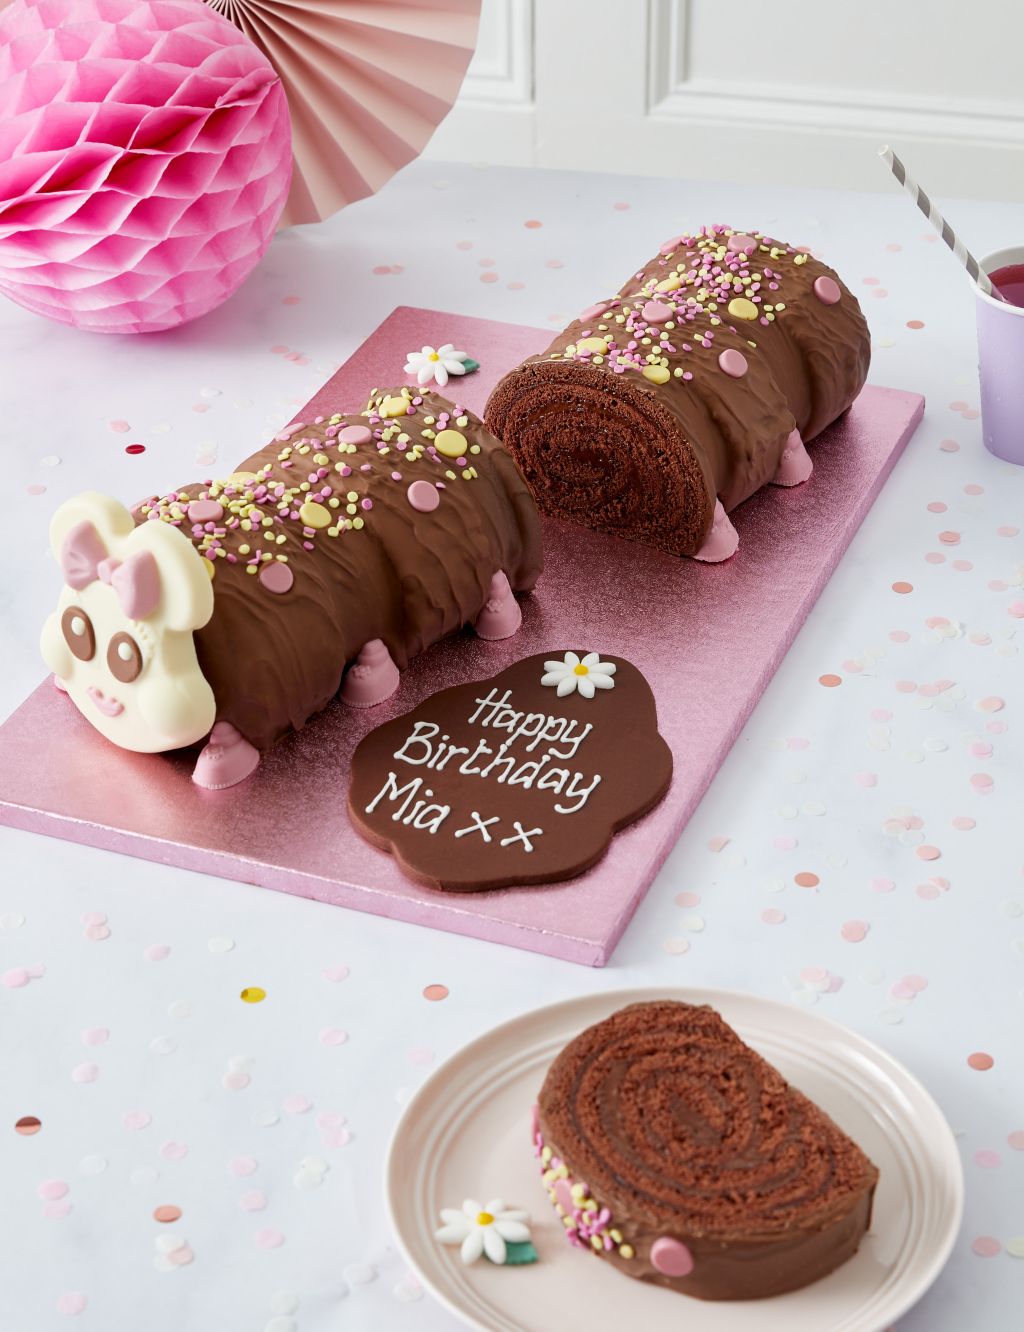 Personalised Connie the Giant Caterpillar™ Cake (Serves 40)